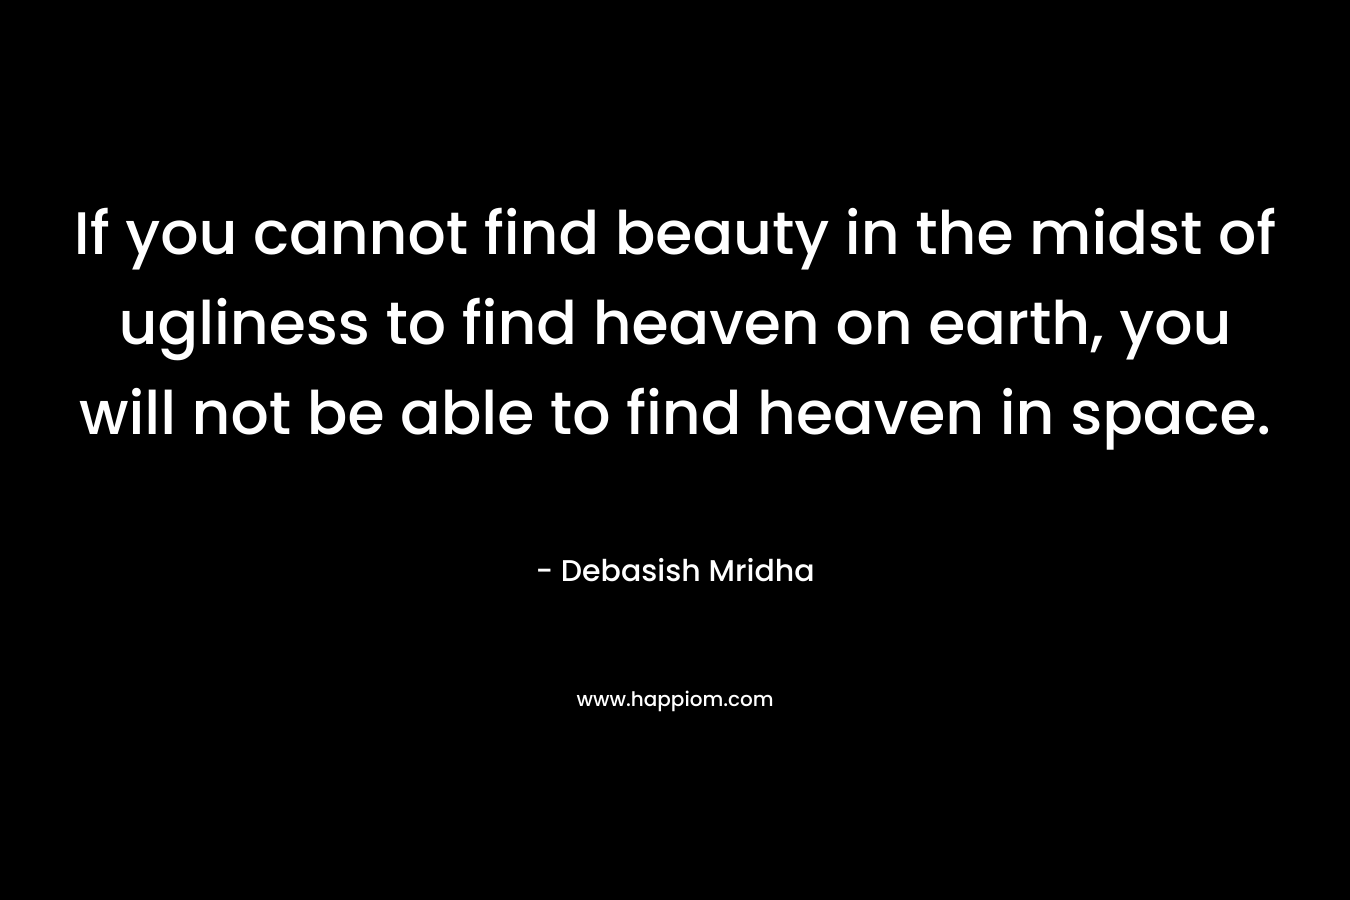 If you cannot find beauty in the midst of ugliness to find heaven on earth, you will not be able to find heaven in space.